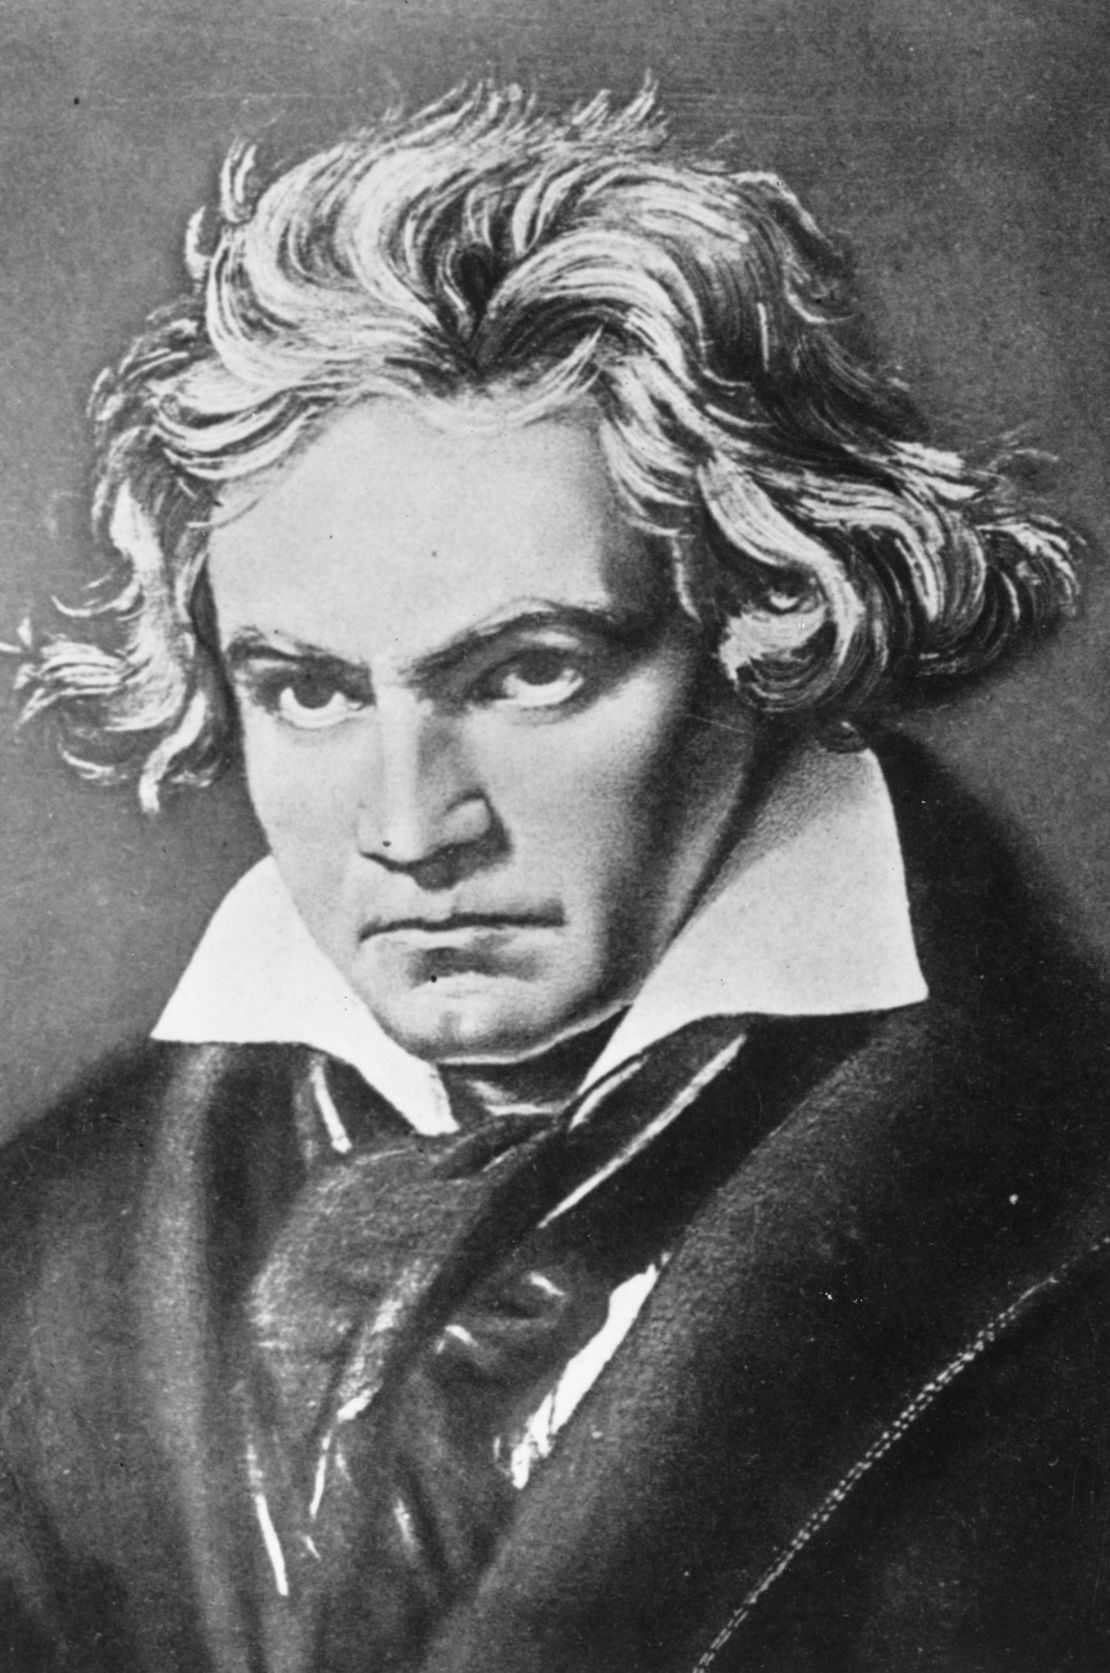 The Ninth Symphony was Ludwig van Beethoven' final major work -- the composer was deaf by the time it was completed.